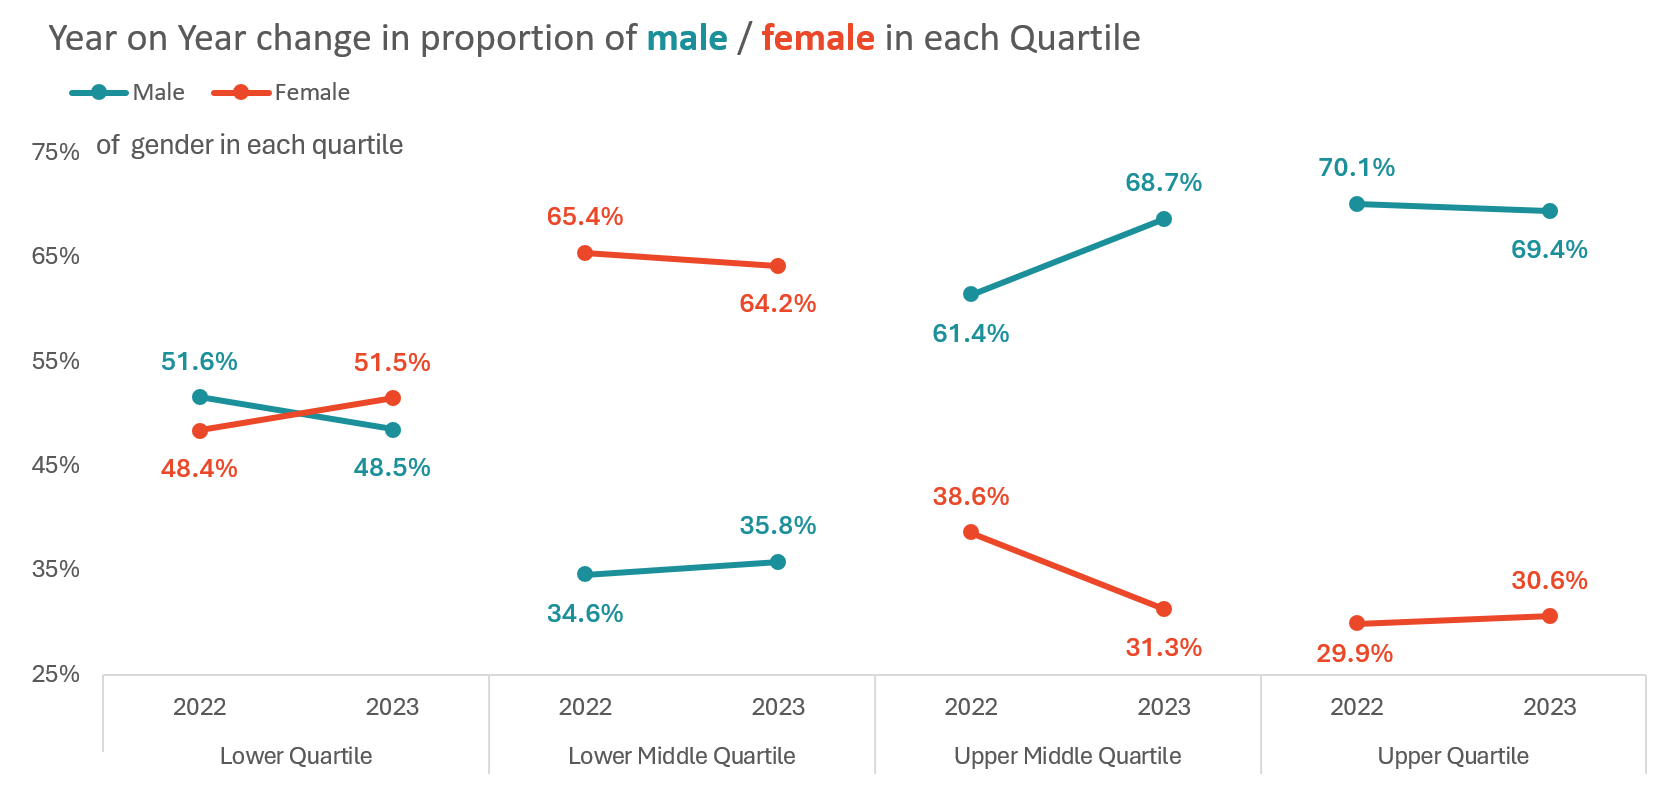 Year on year change in the proportion of males and female in each quartile